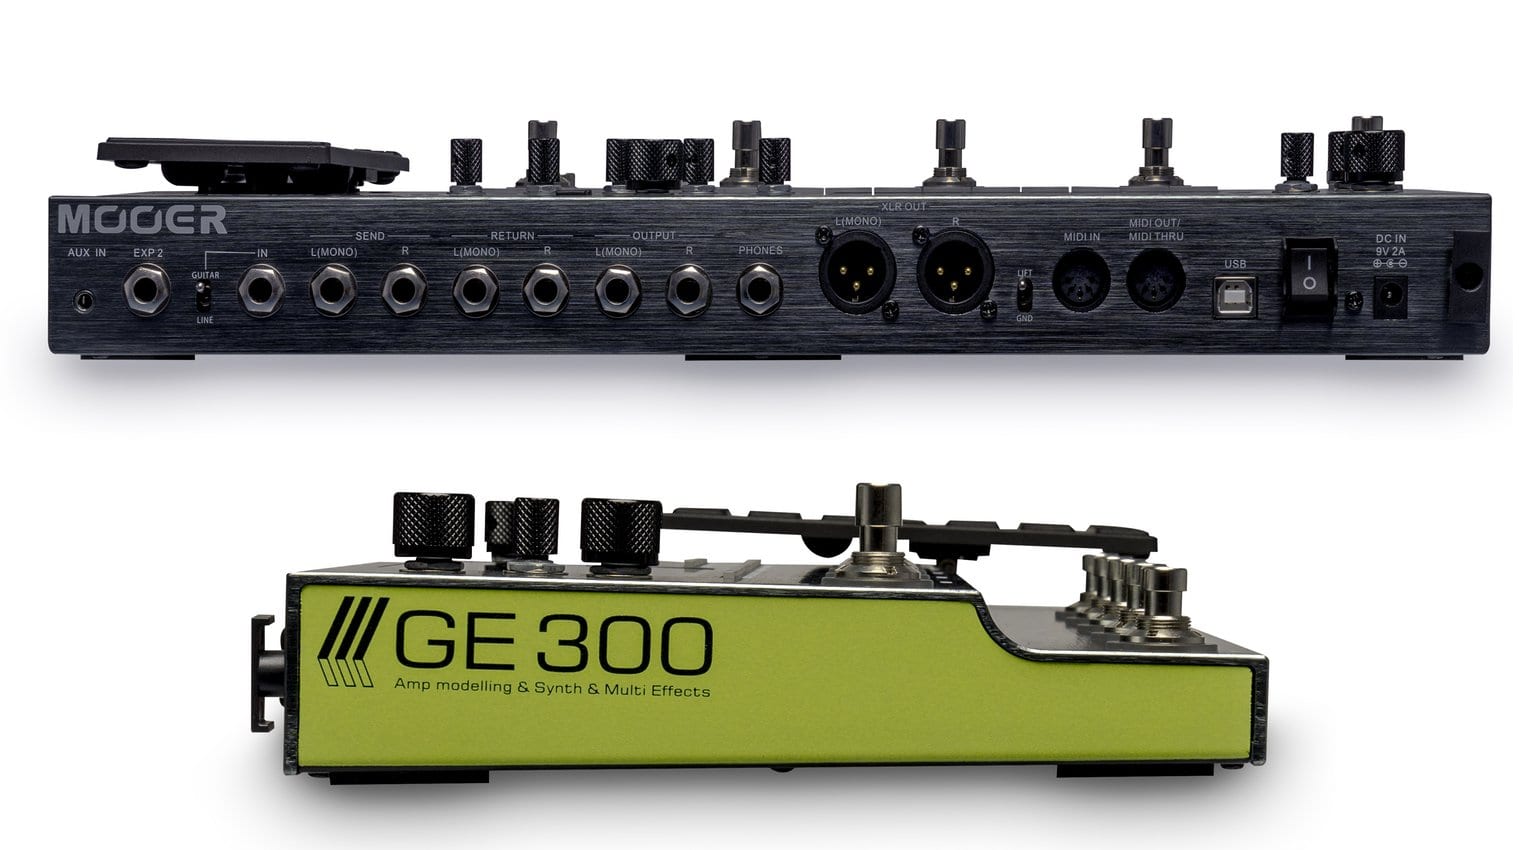 Mooer GE300 - Inputs/Outputs